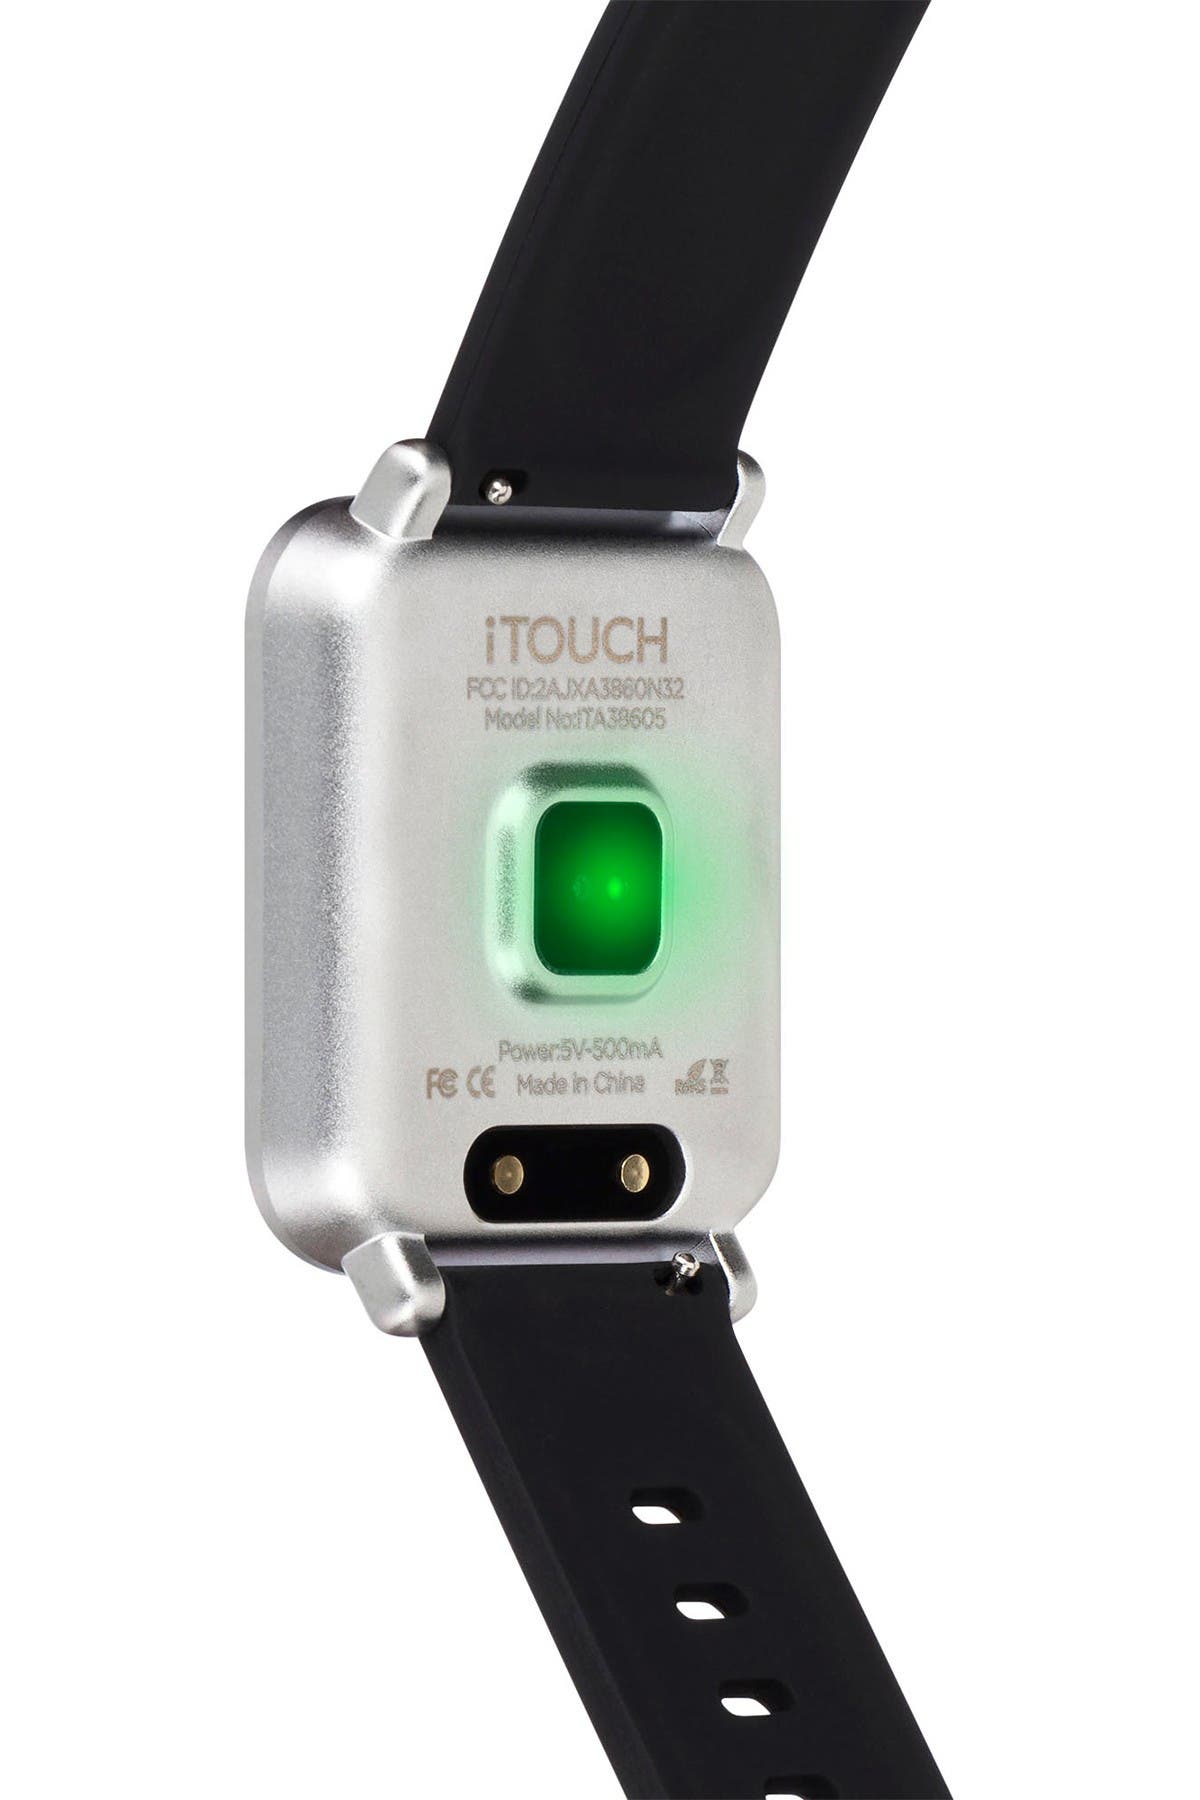 itouch watch charger 2 pin